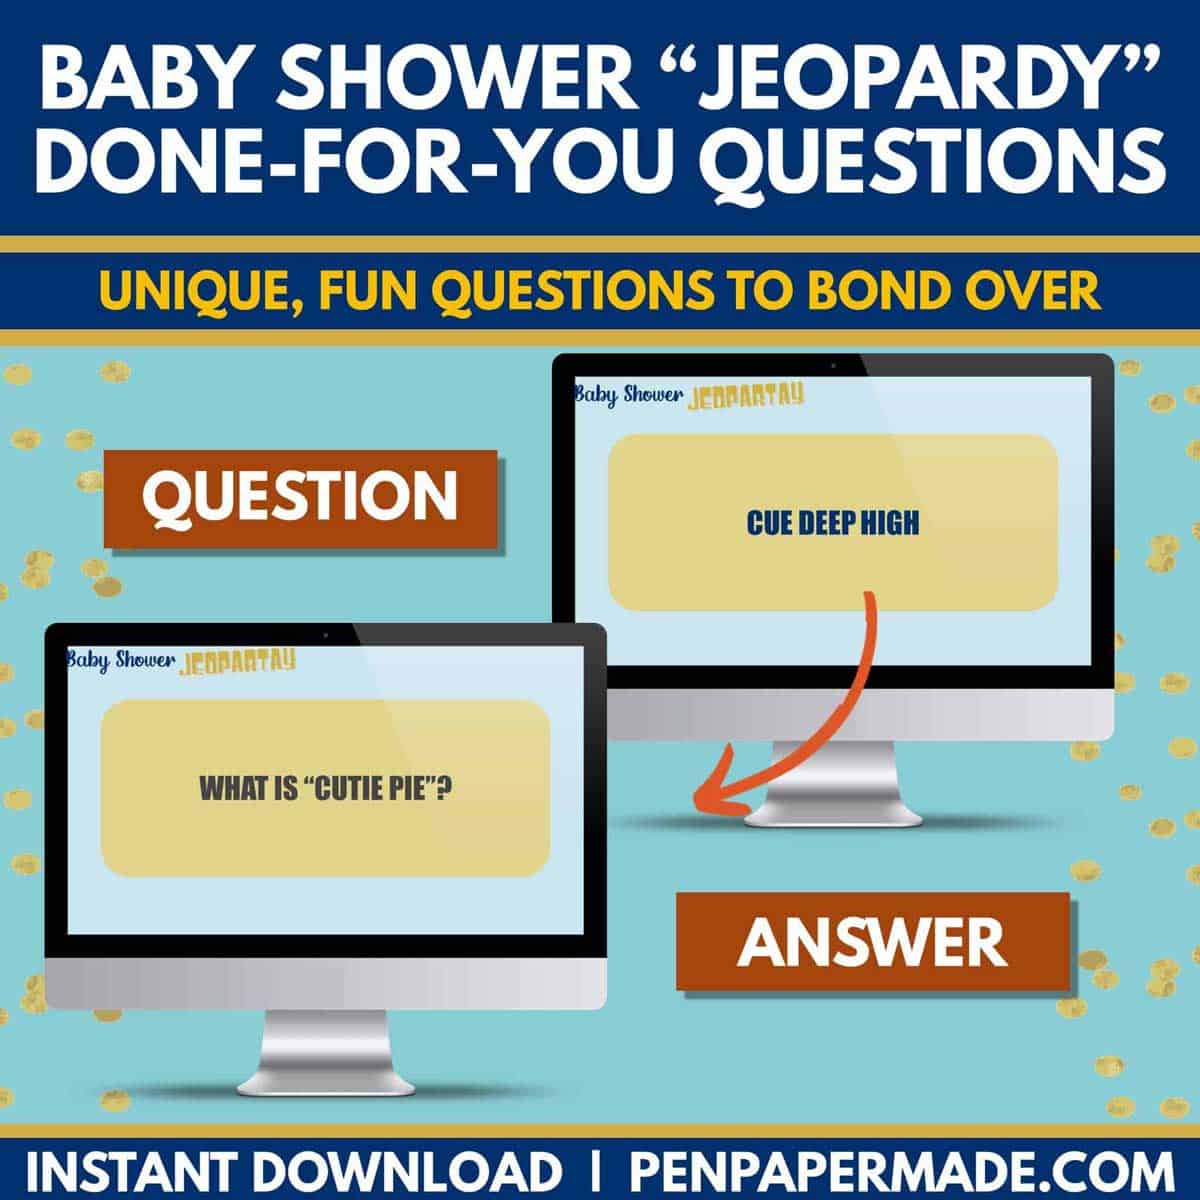 fun blue baby shower jeopardy questions like what does cue deep high sound like?